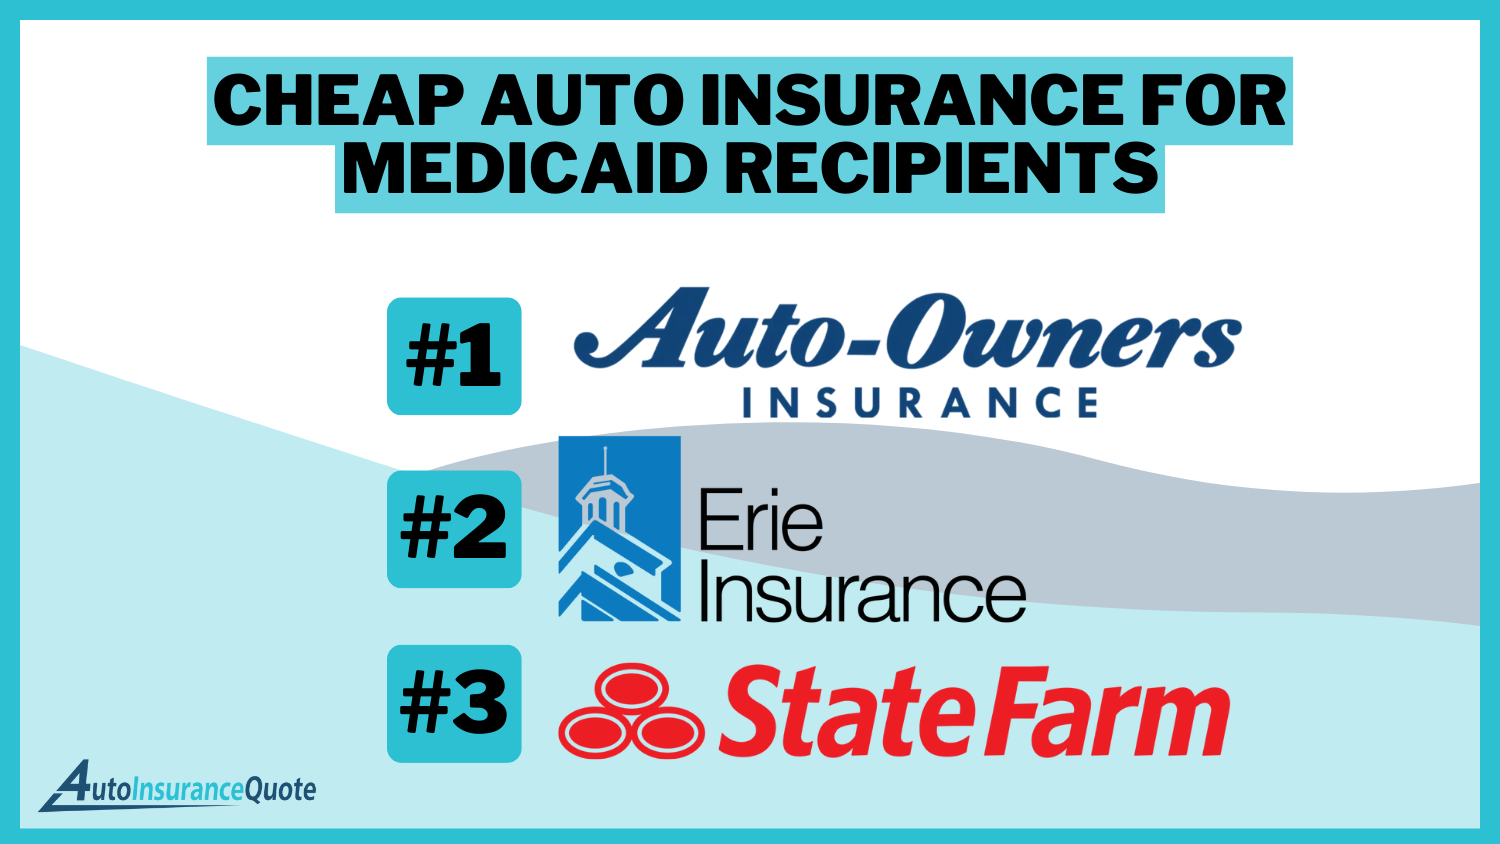 Cheap Auto Insurance for Medicaid Recipients: Auto-Owners, Erie, State Farm